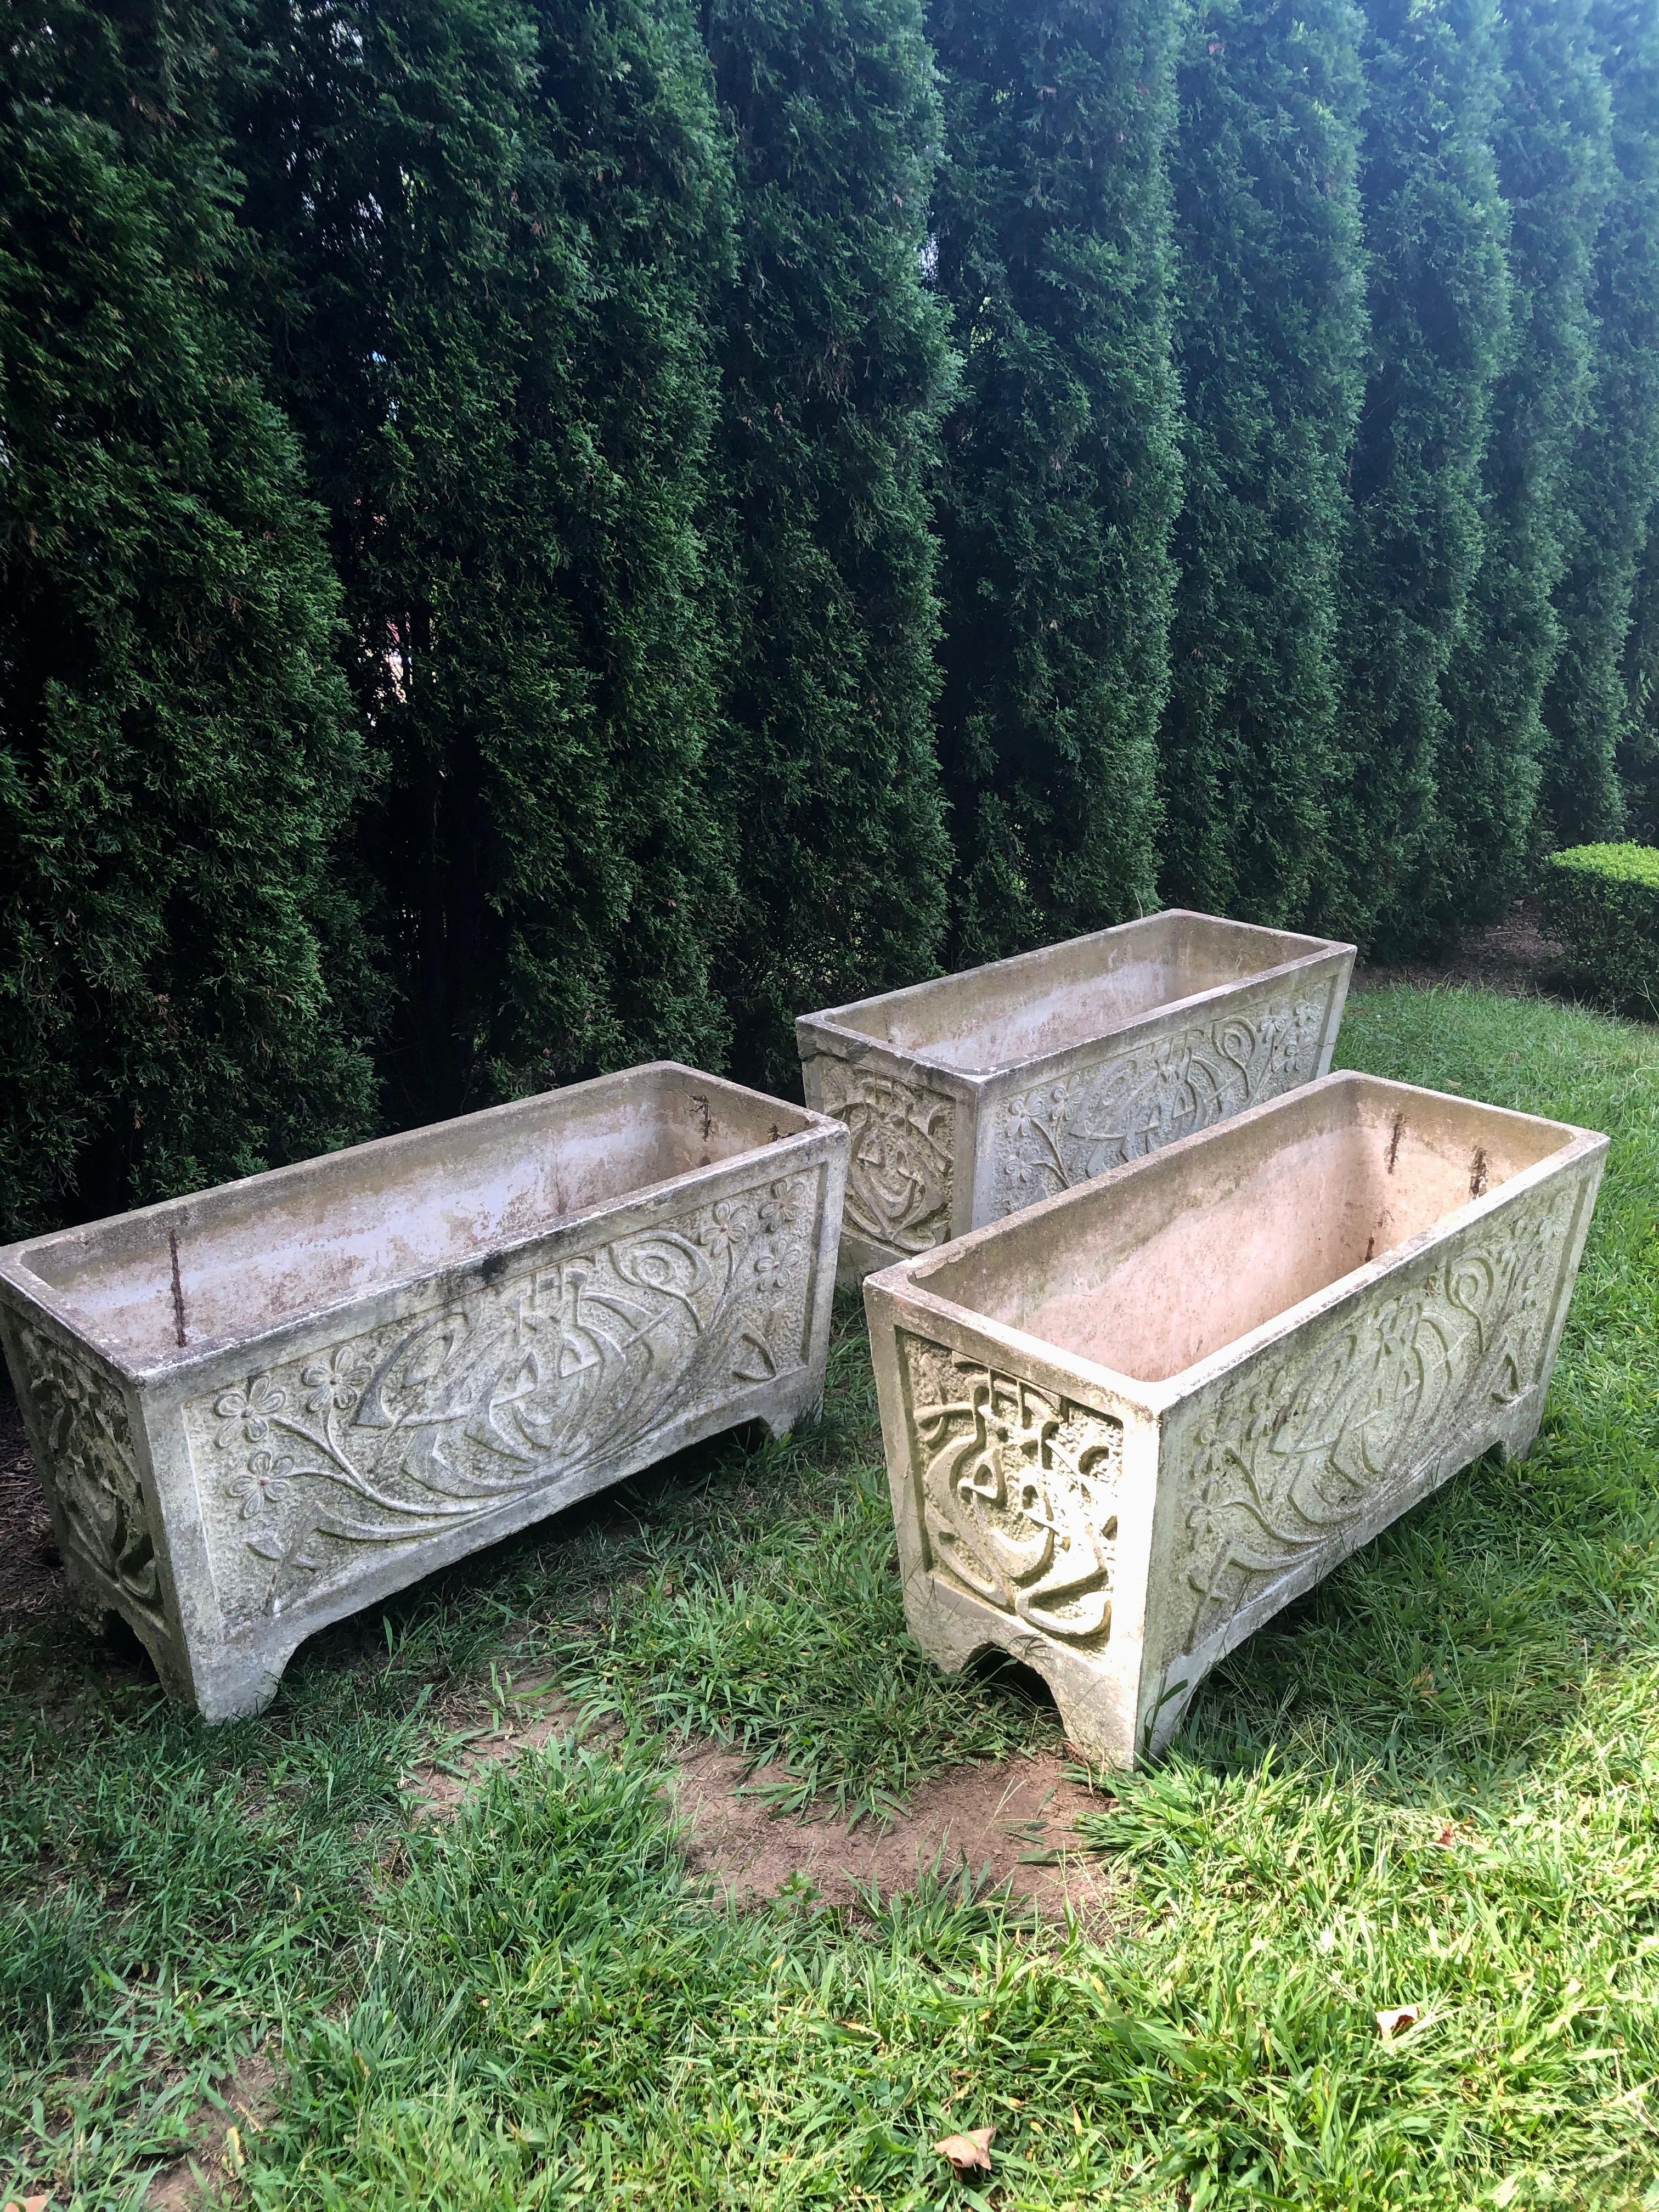 This set of three large cast stone planters is quite heavy and have an elegant form. They have a lovely Art Nouveau style and are sufficiently large to house a plethora of blooms or small boxwoods. In very good condition overall, there are some